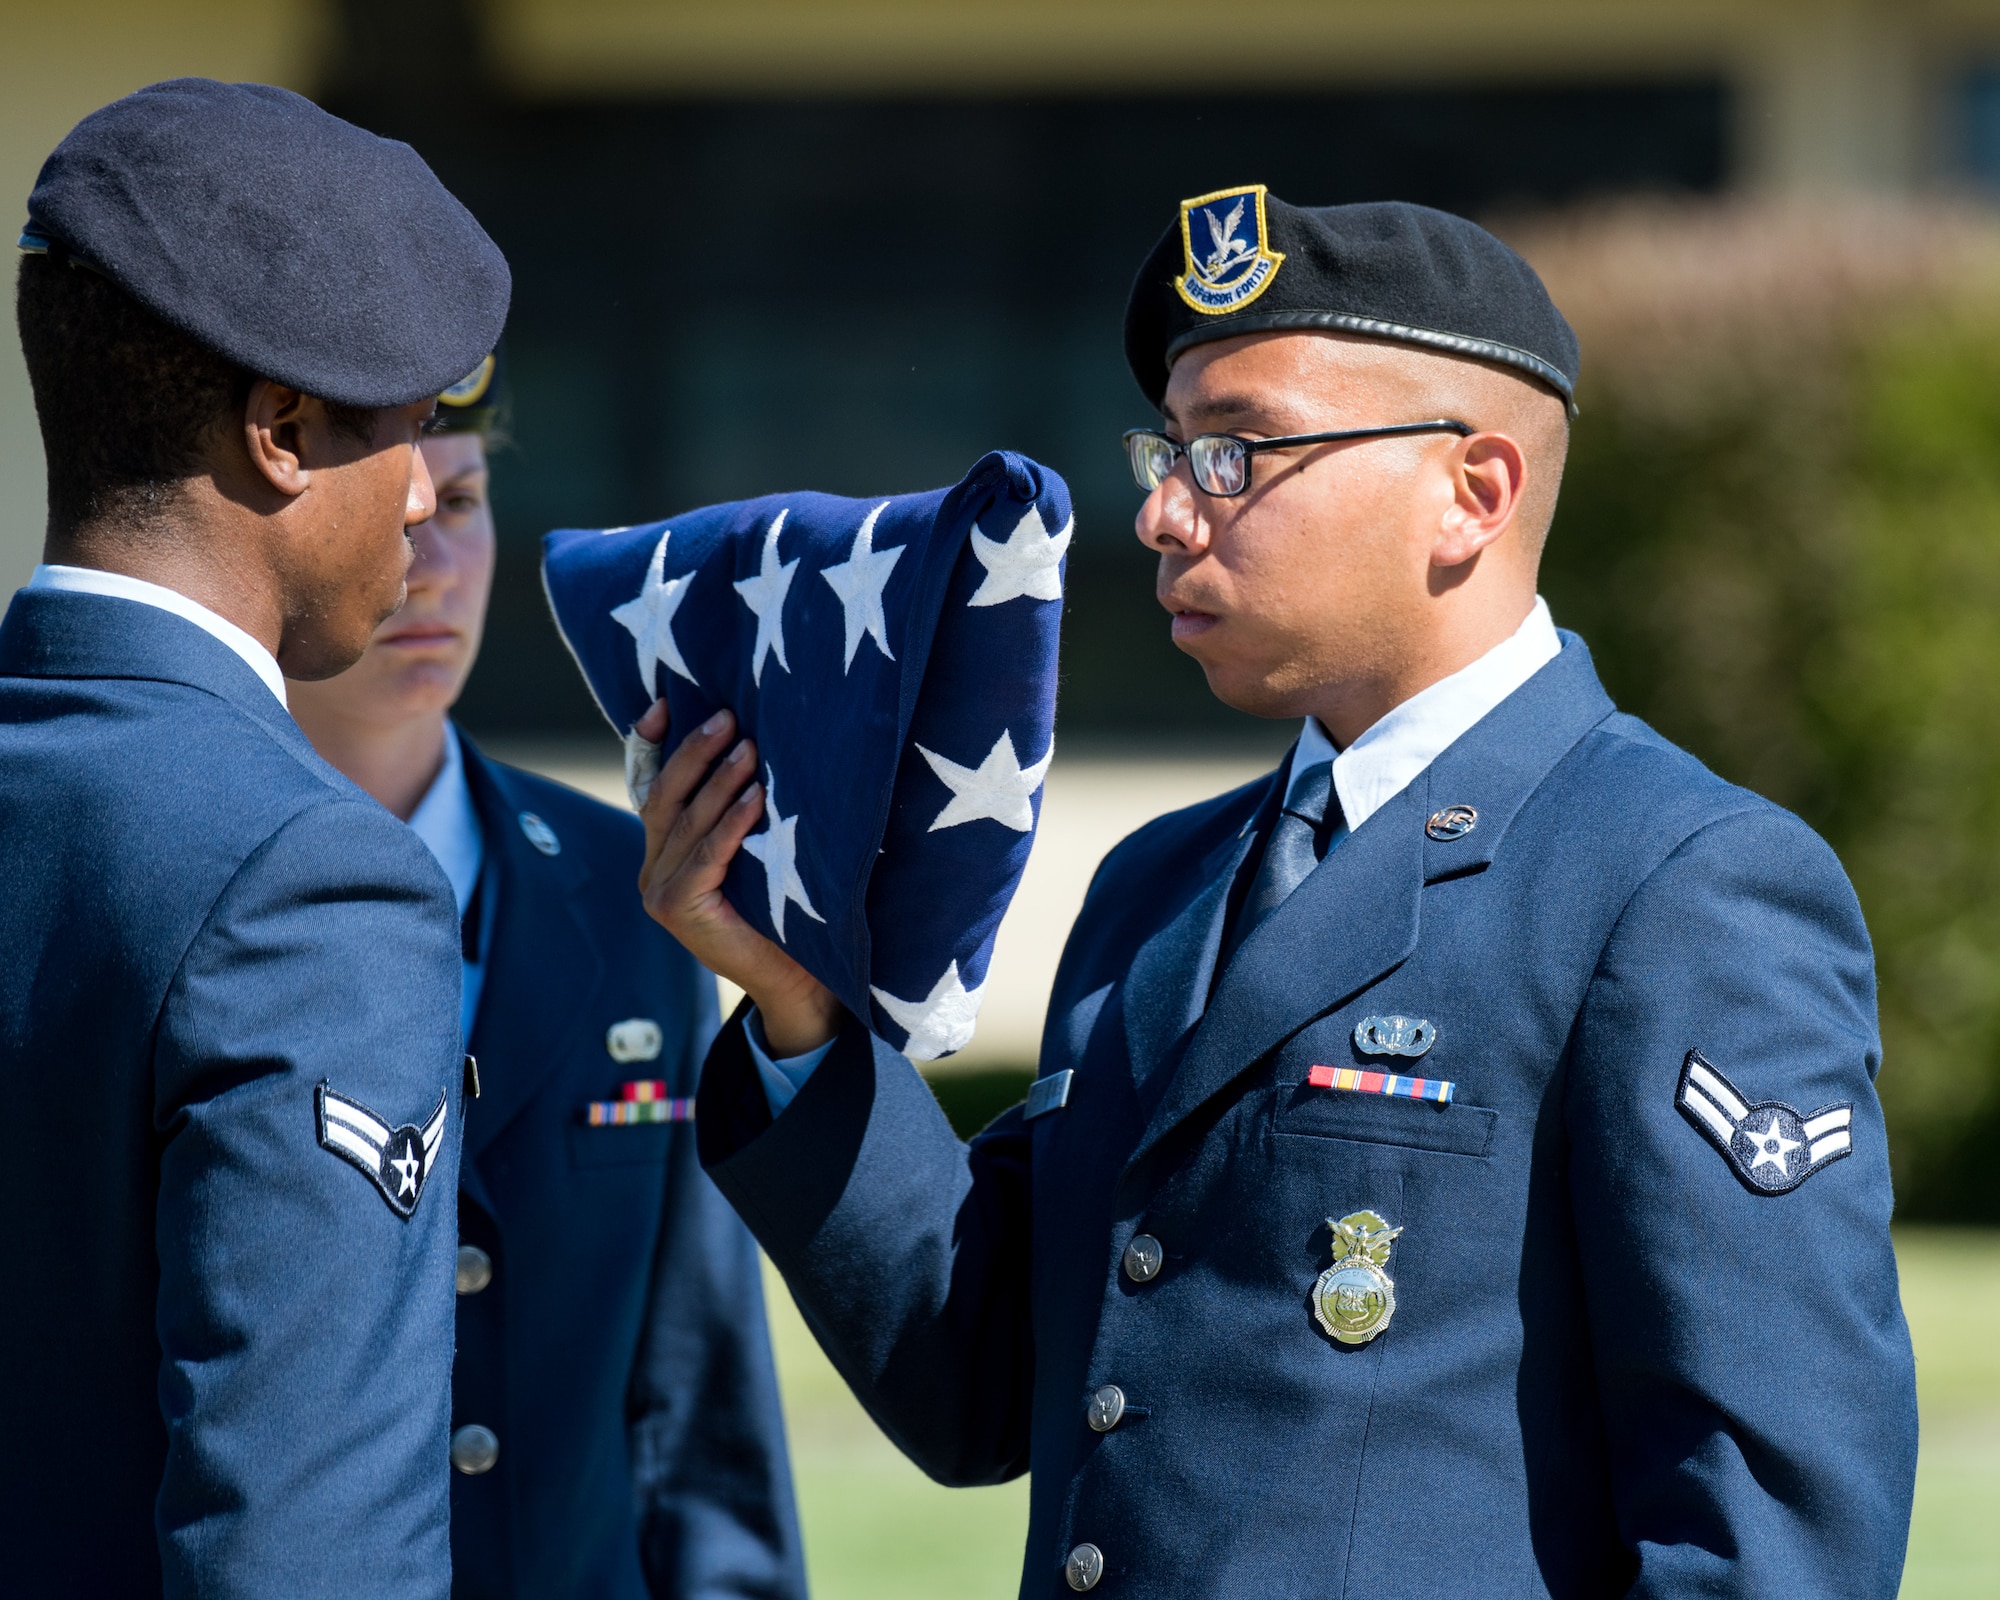 Defenders from the 60th Security Forces Squadron, Travis Air Force Base, Calif., perform a retreat ceremony, May 18, 2017. The ceremony was one of several events sponsored by the squadron in honor of Police Week. (U.S. Air Force photo by Louis Briscese)